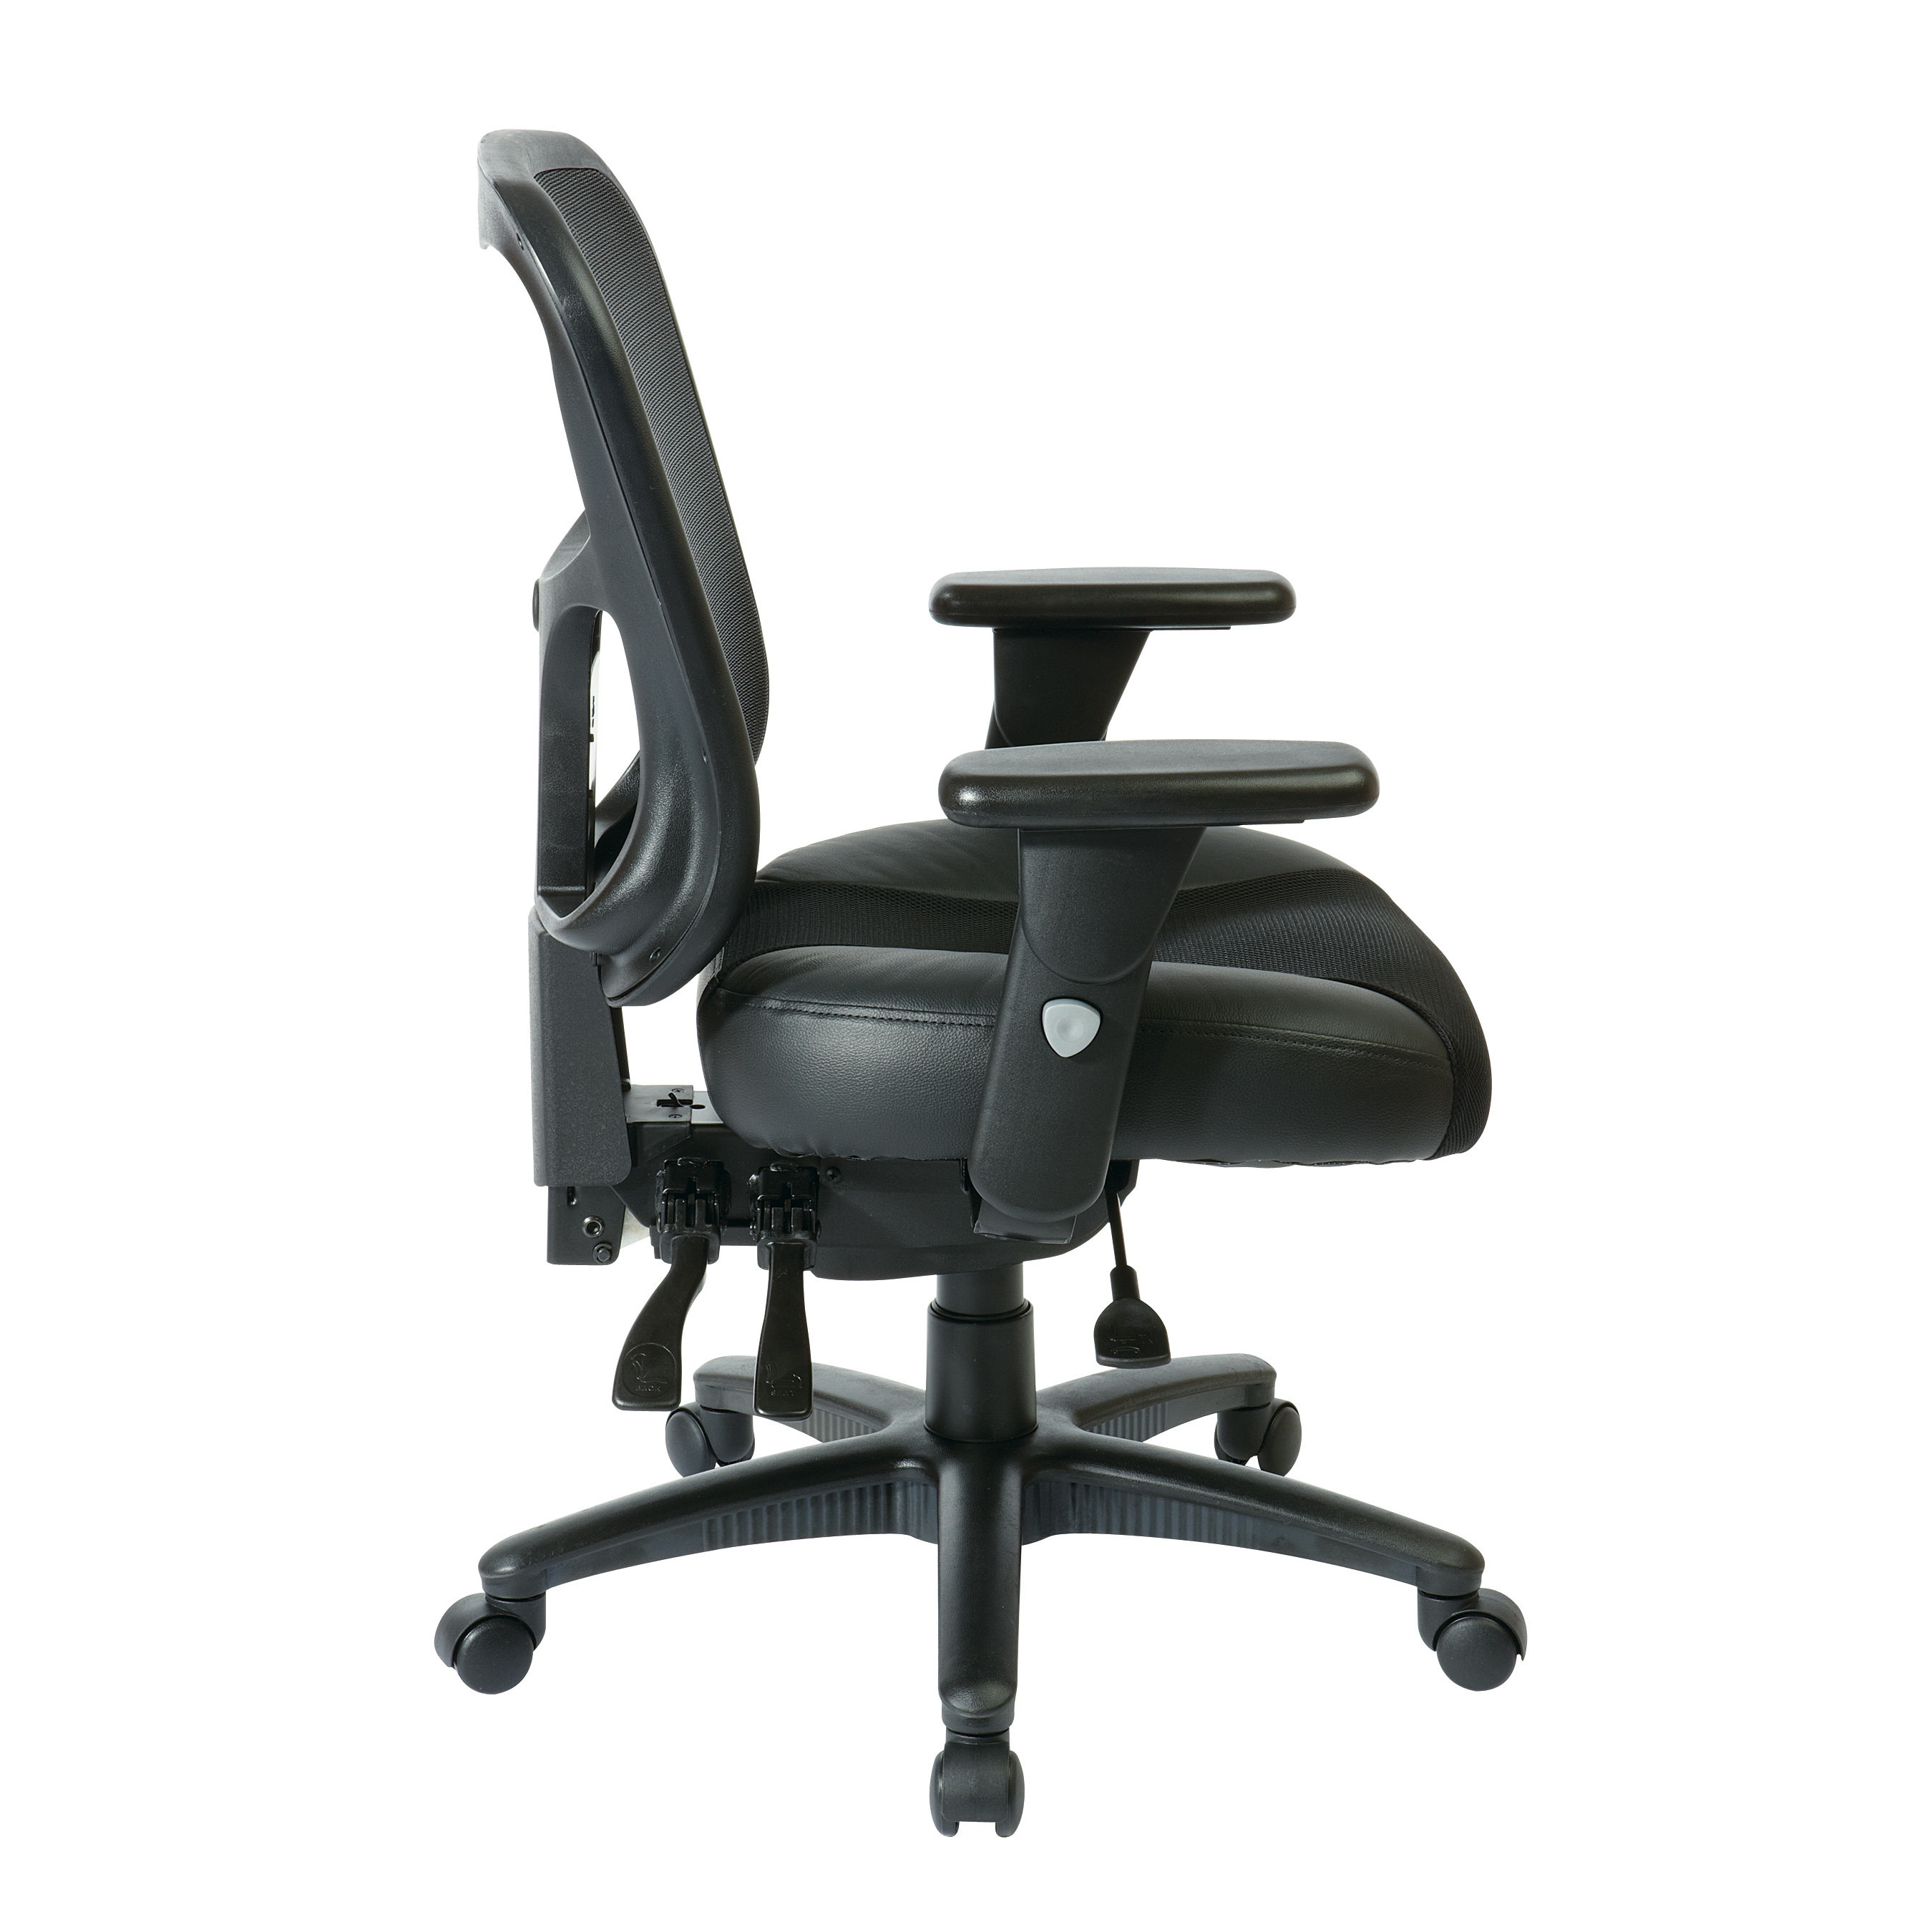 Office Star Screen Back Manager's Chair White Faux Leather